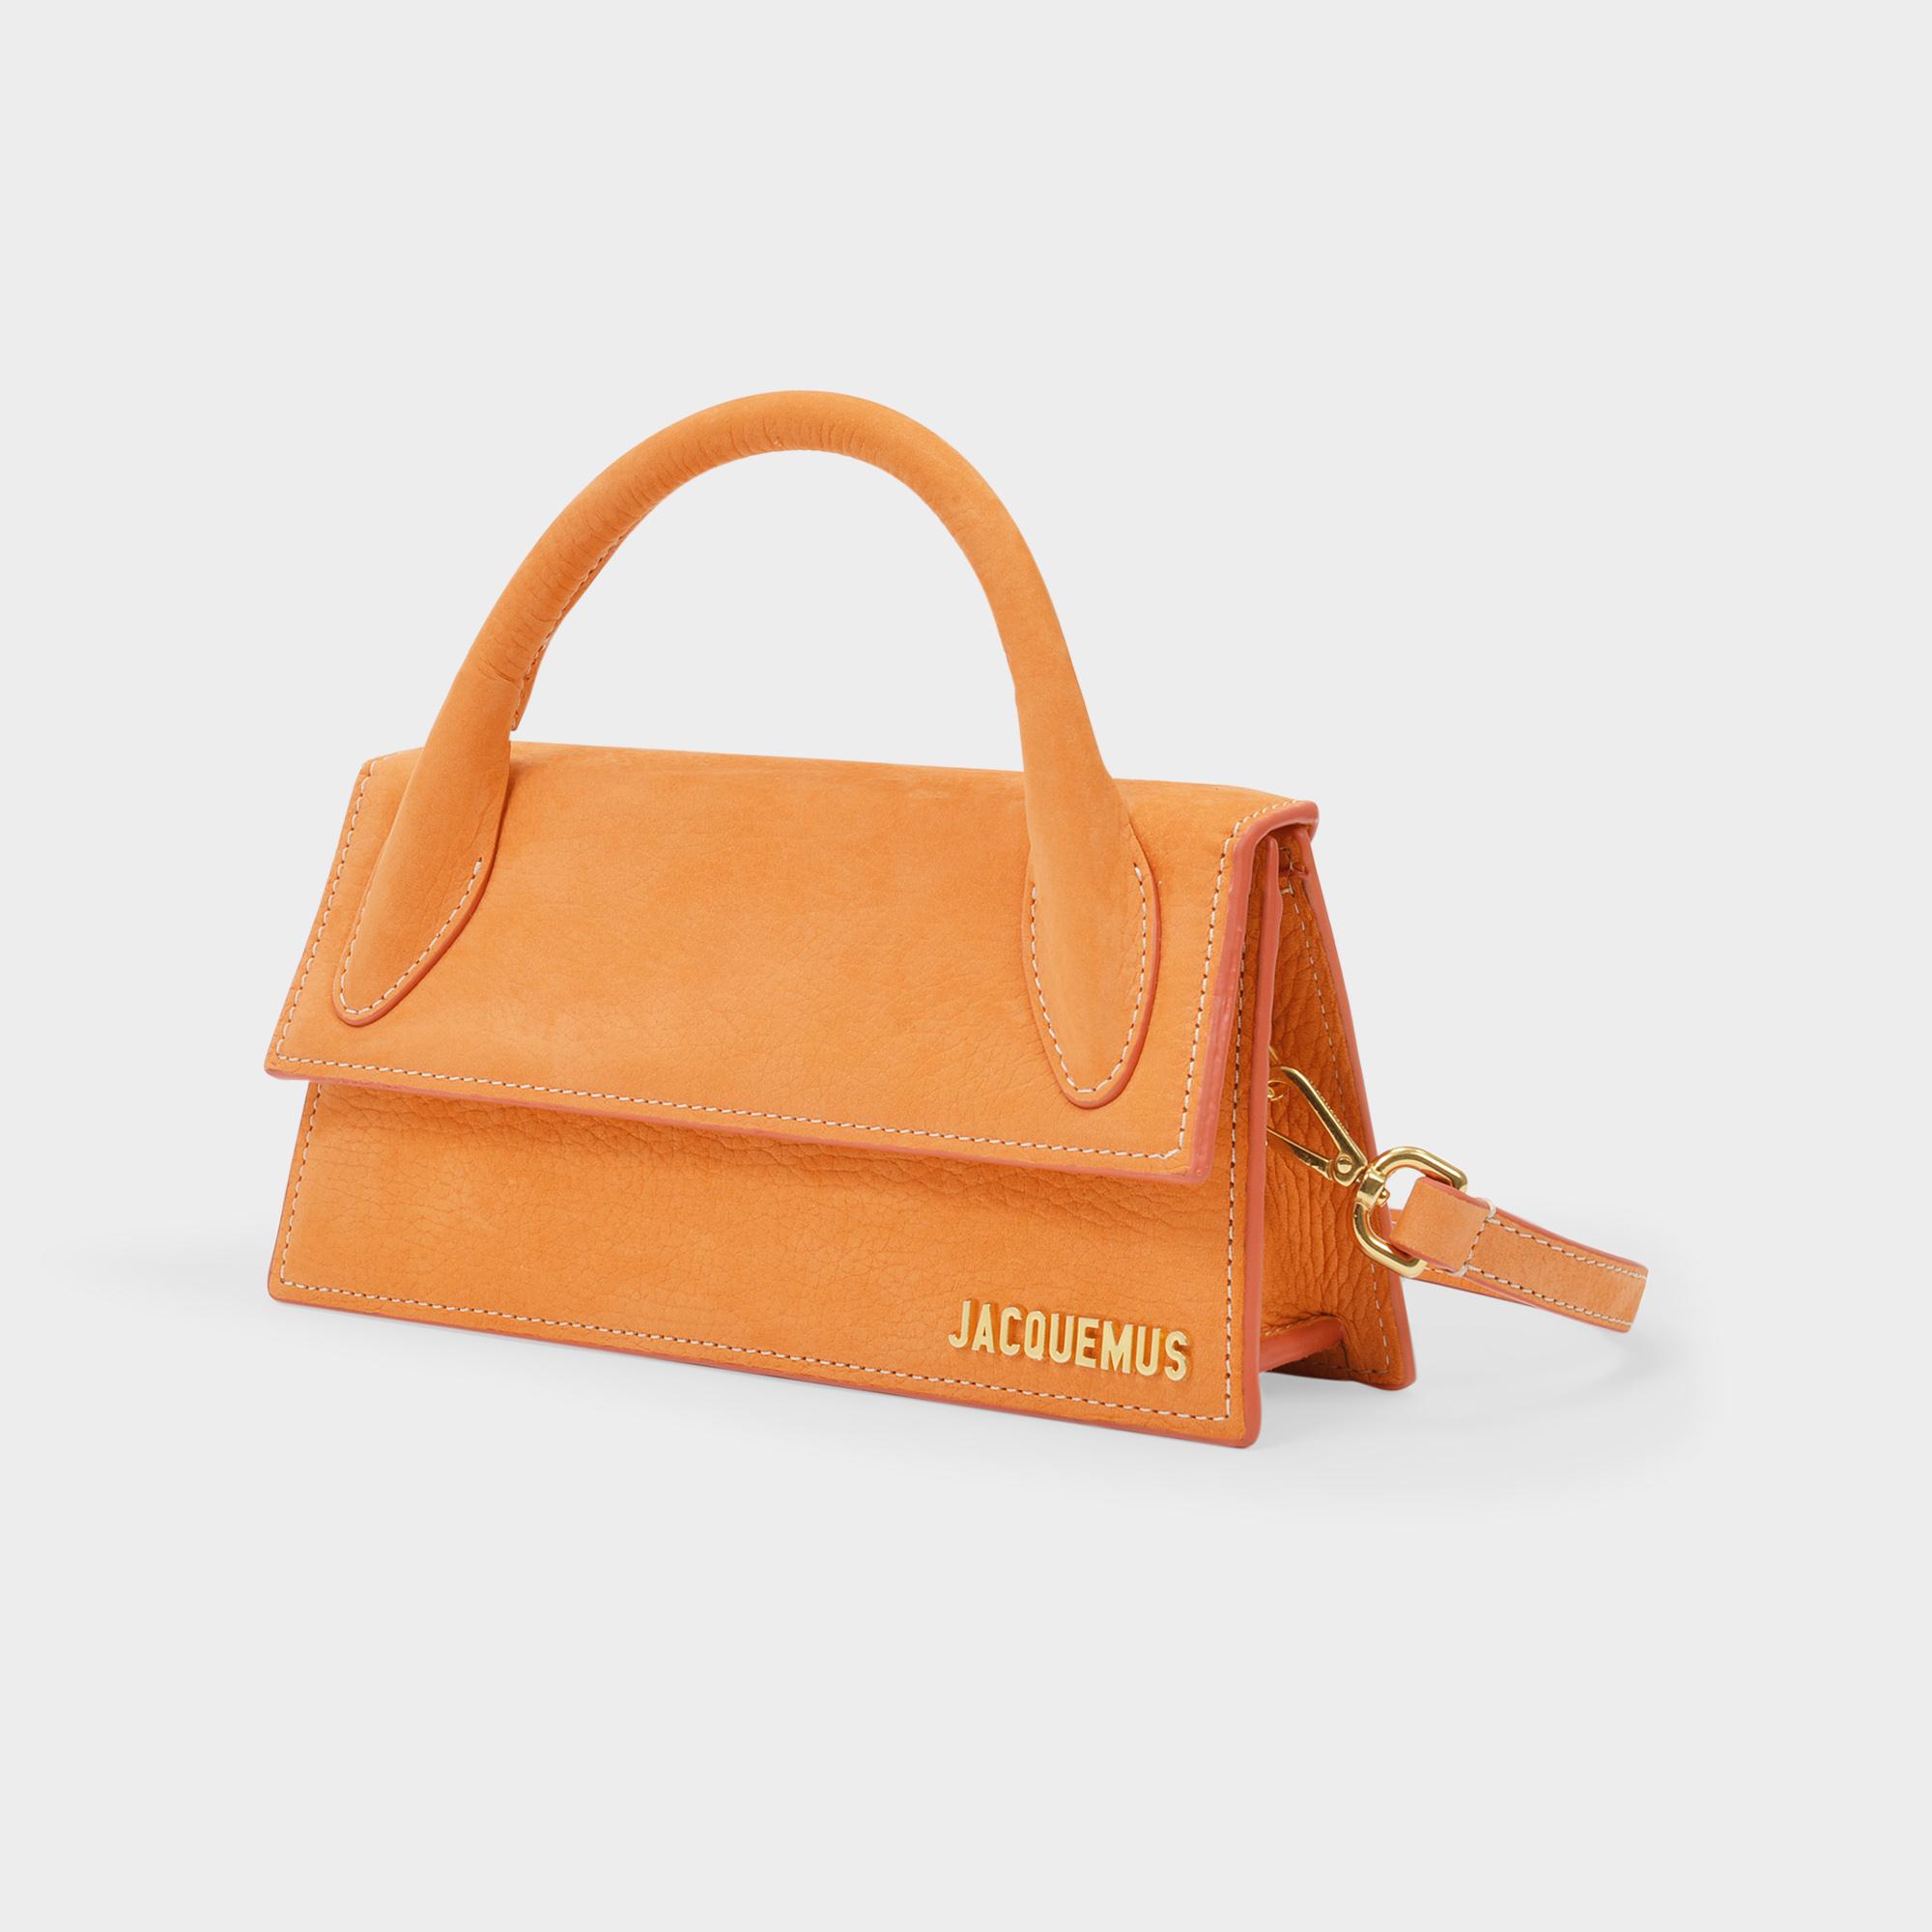 Jacquemus Le Chiquito Long Bag In Orange Leather | Lyst